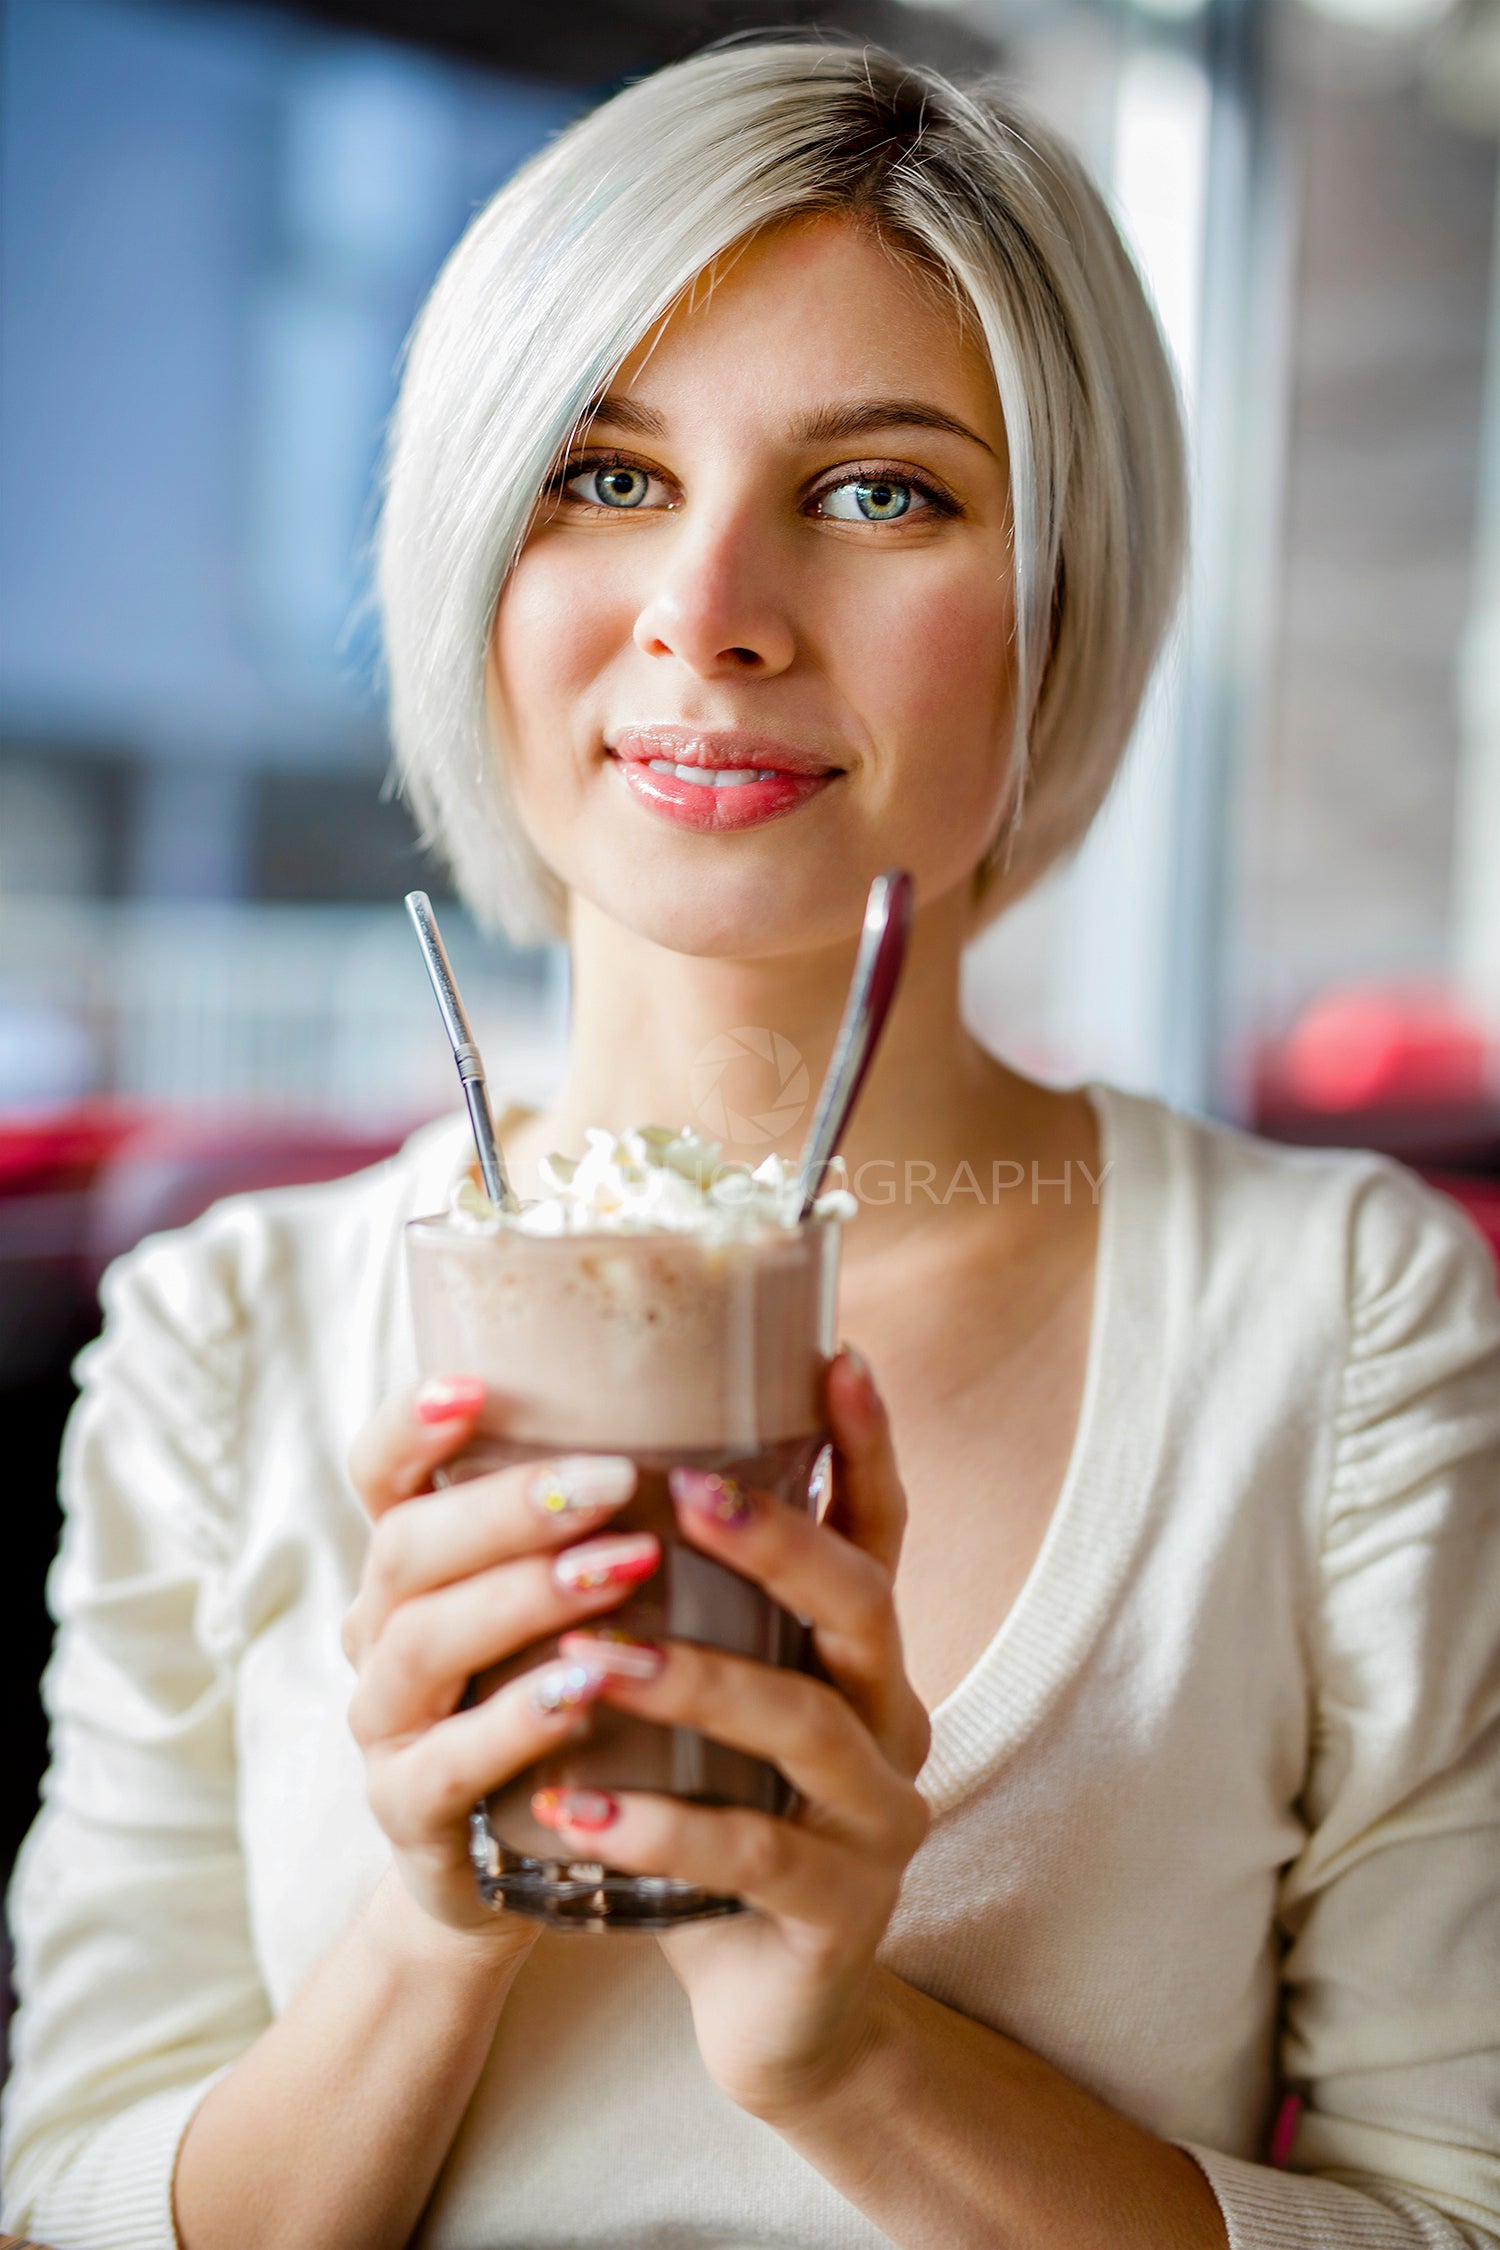 Woman Holding Glass Of Hot Chocolate With Cream In Cafe